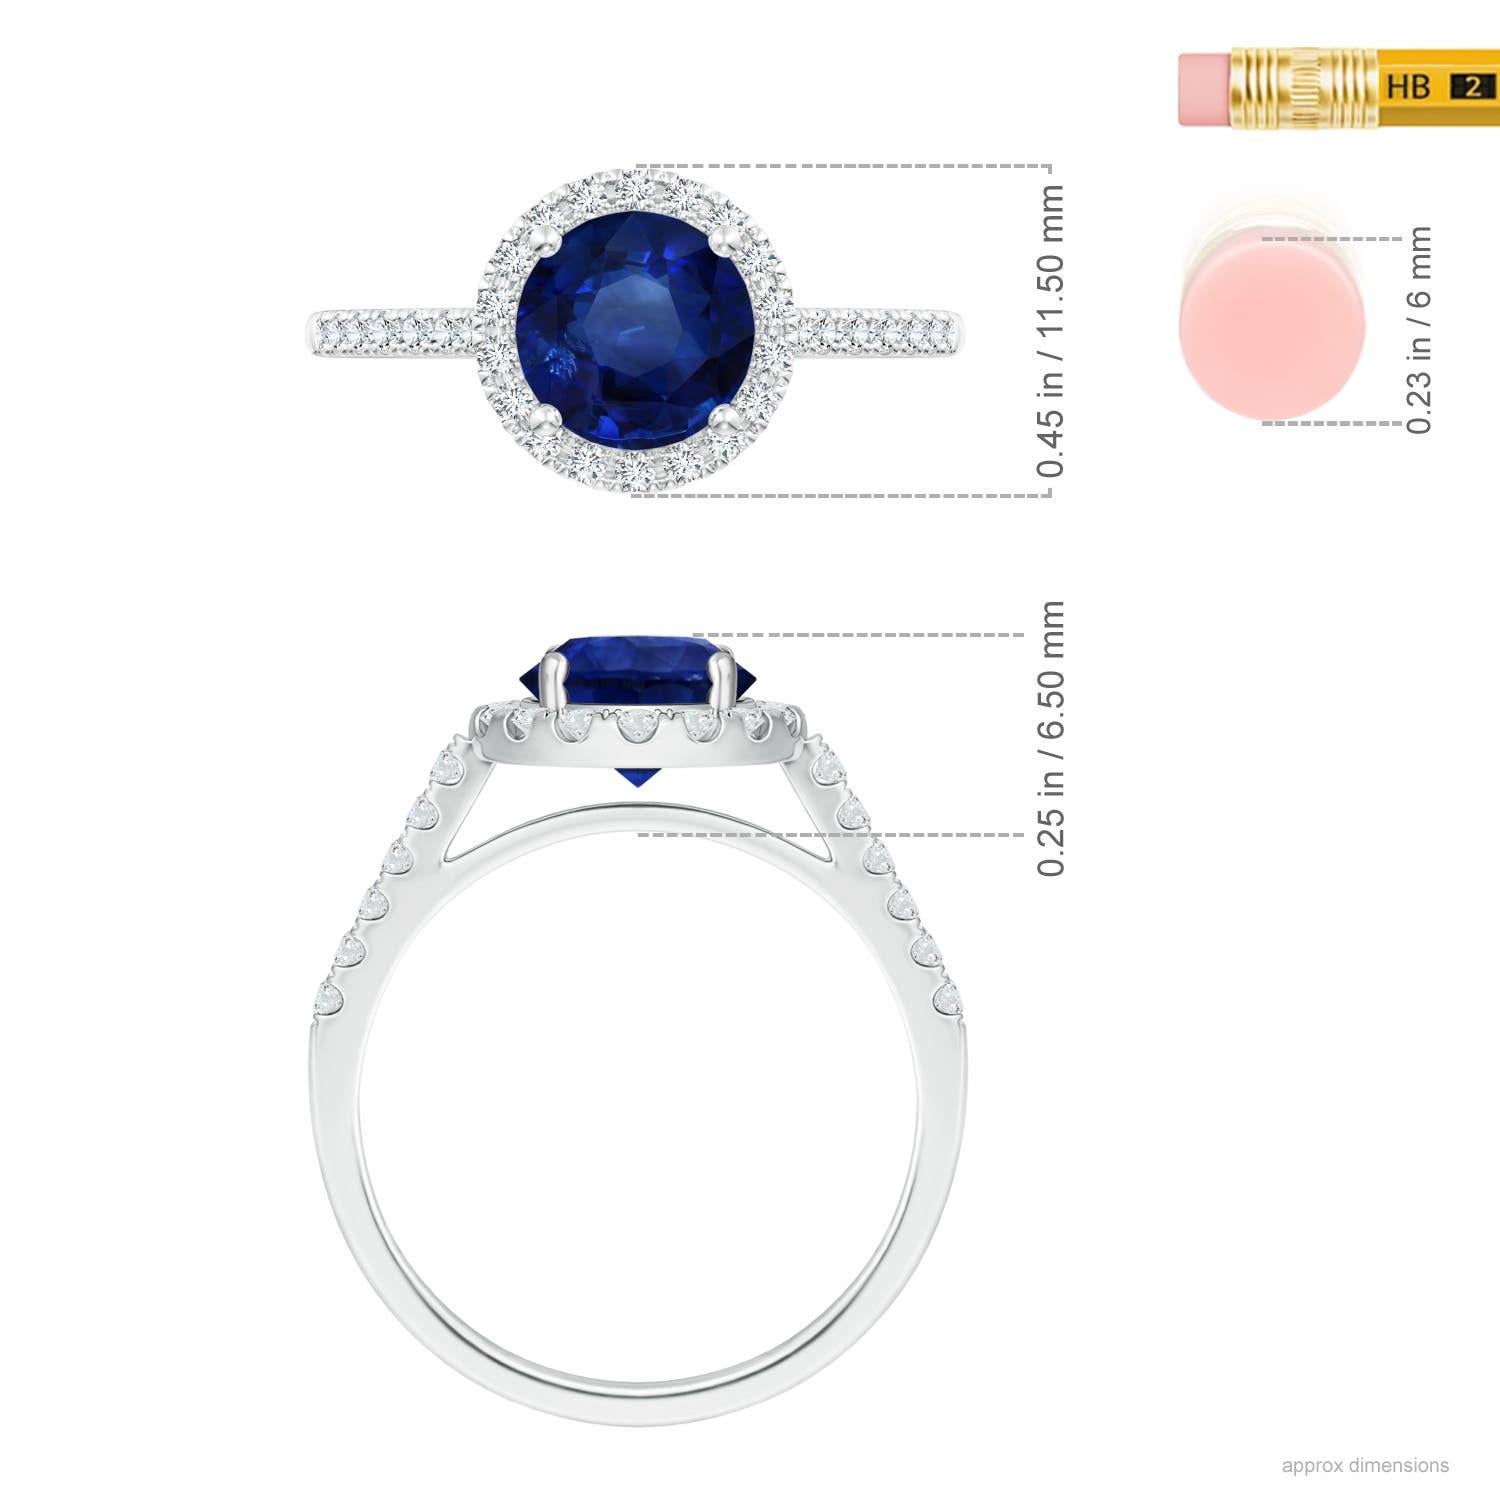 For Sale:  Angara Gia Certified Natural Round Sapphire Ring in White Gold with Diamond Halo 4